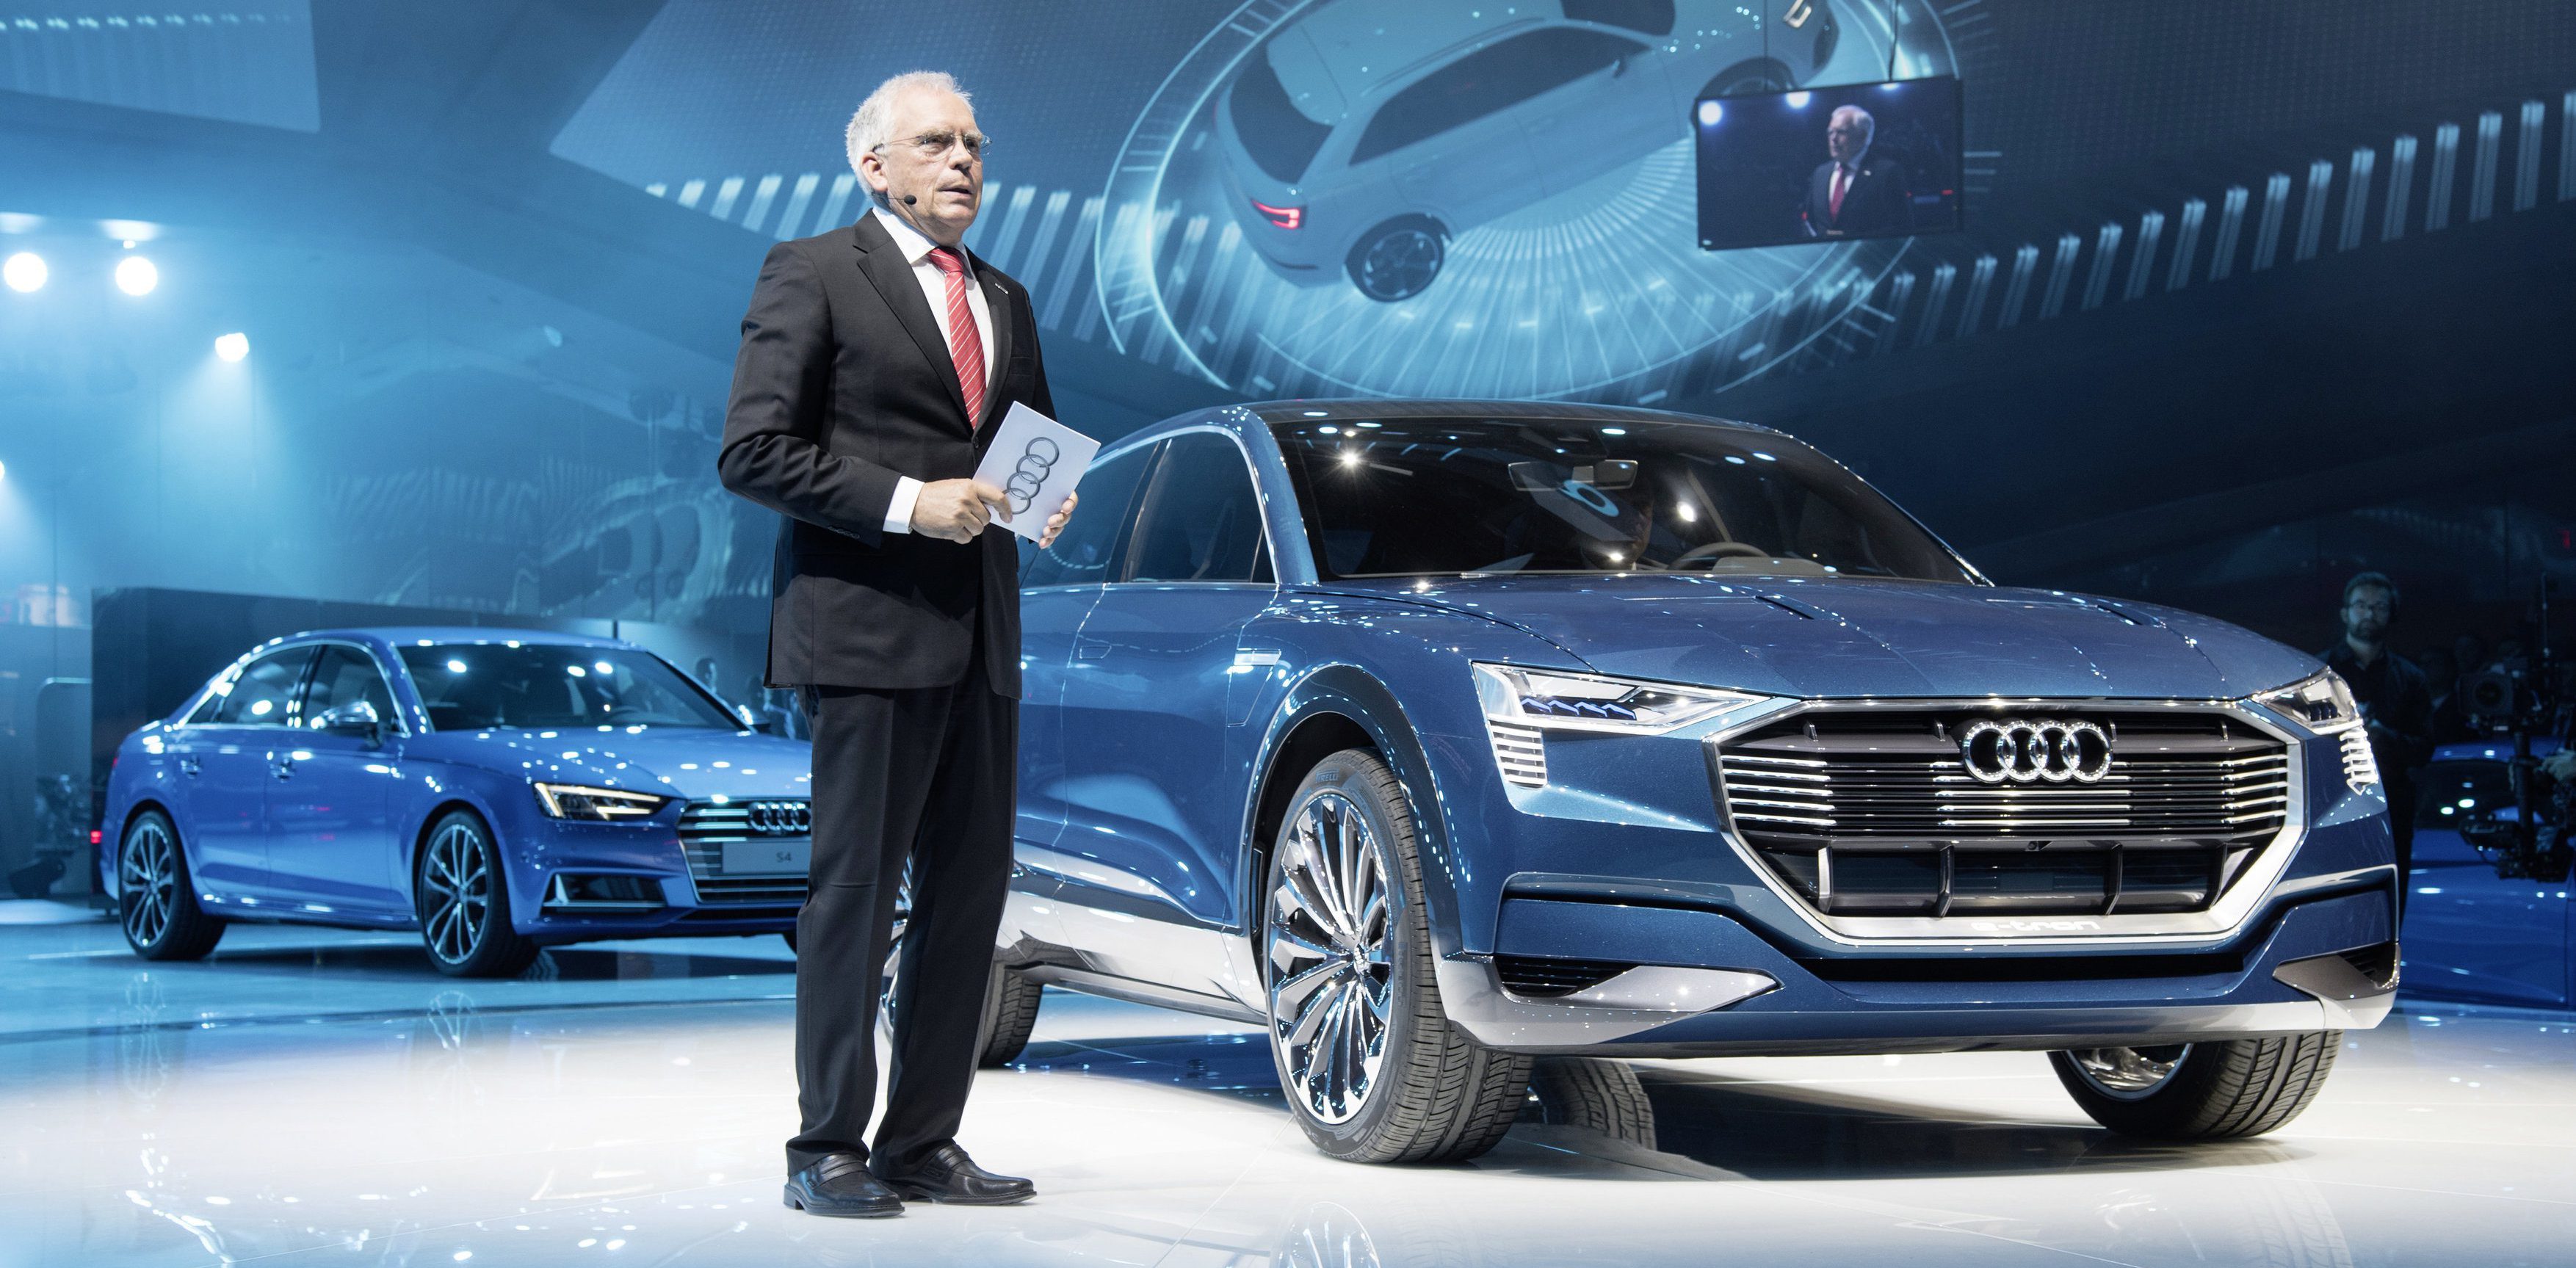 Prof. Dr. Ulrich Hackenberg, Member of the Board of Management of AUDI AG for Technical Development, beside the concept car Audi e-tron quattro at the International Auto Show 2015 in Frankfurt/Main.